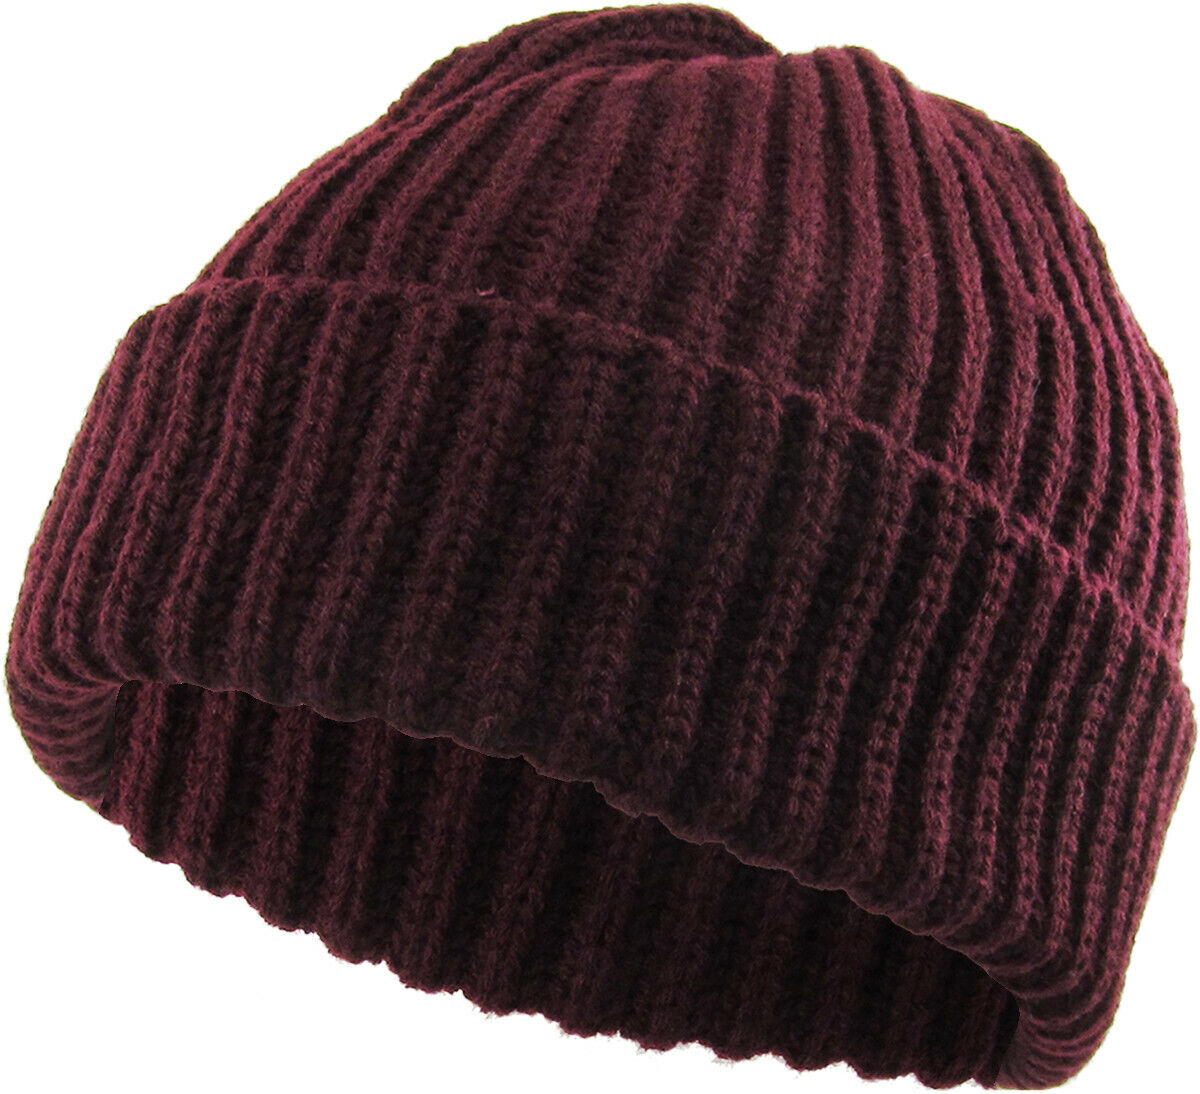 RIBBED BEANIE WINTER WATCH CAP KNIT SKI COLD WEATHER HAT